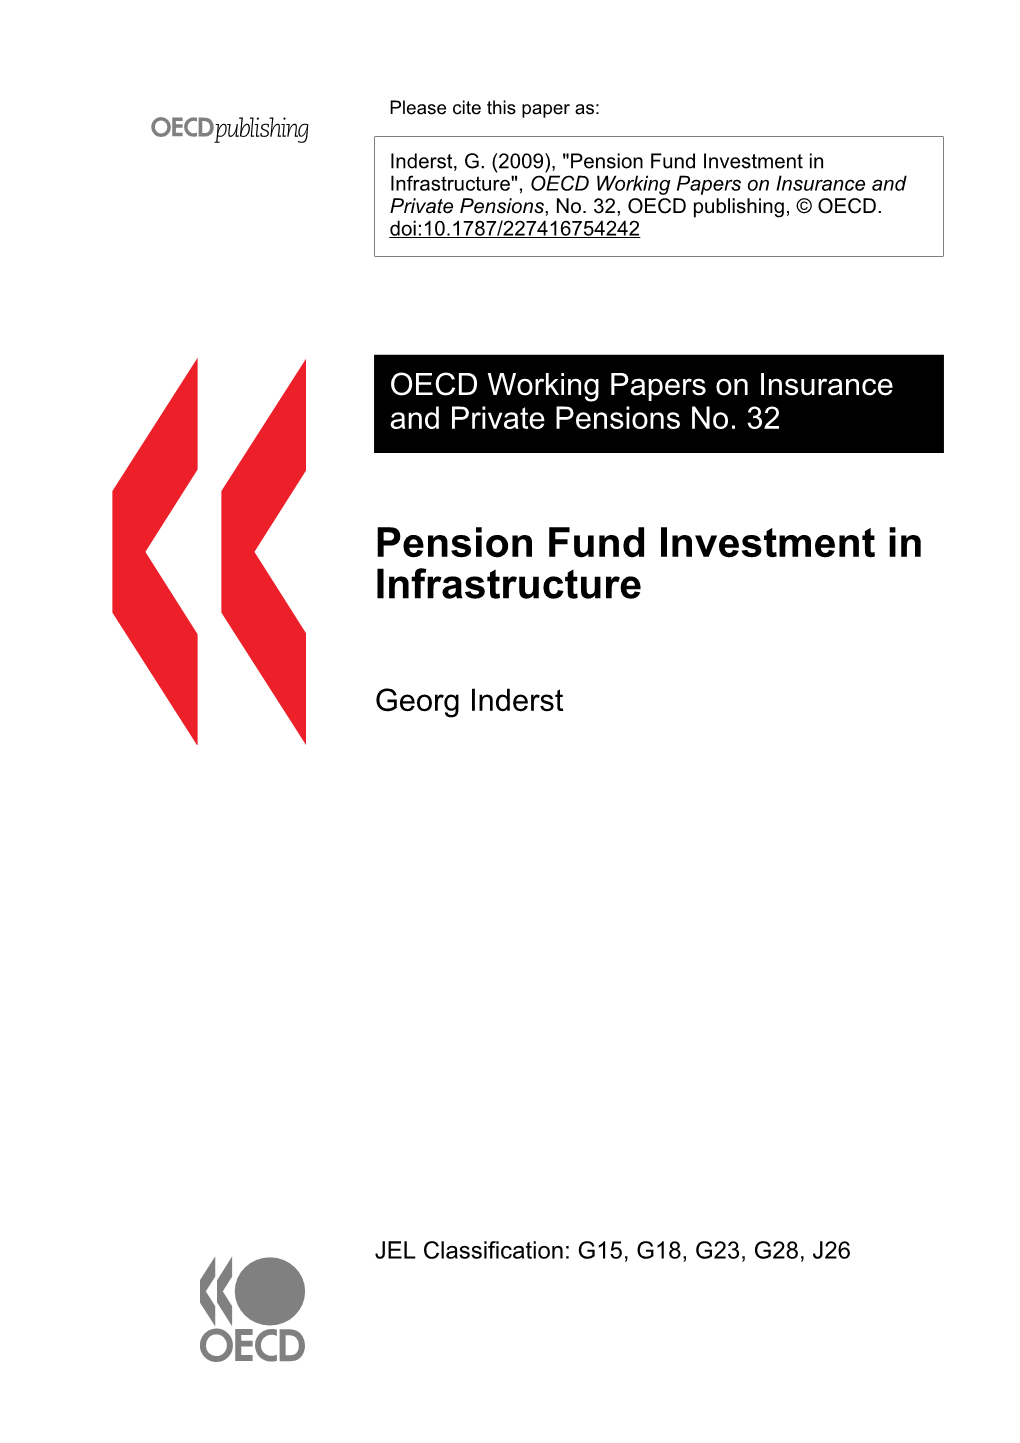 Pension Fund Investment in Infrastructure", OECD Working Papers on Insurance and Private Pensions, No